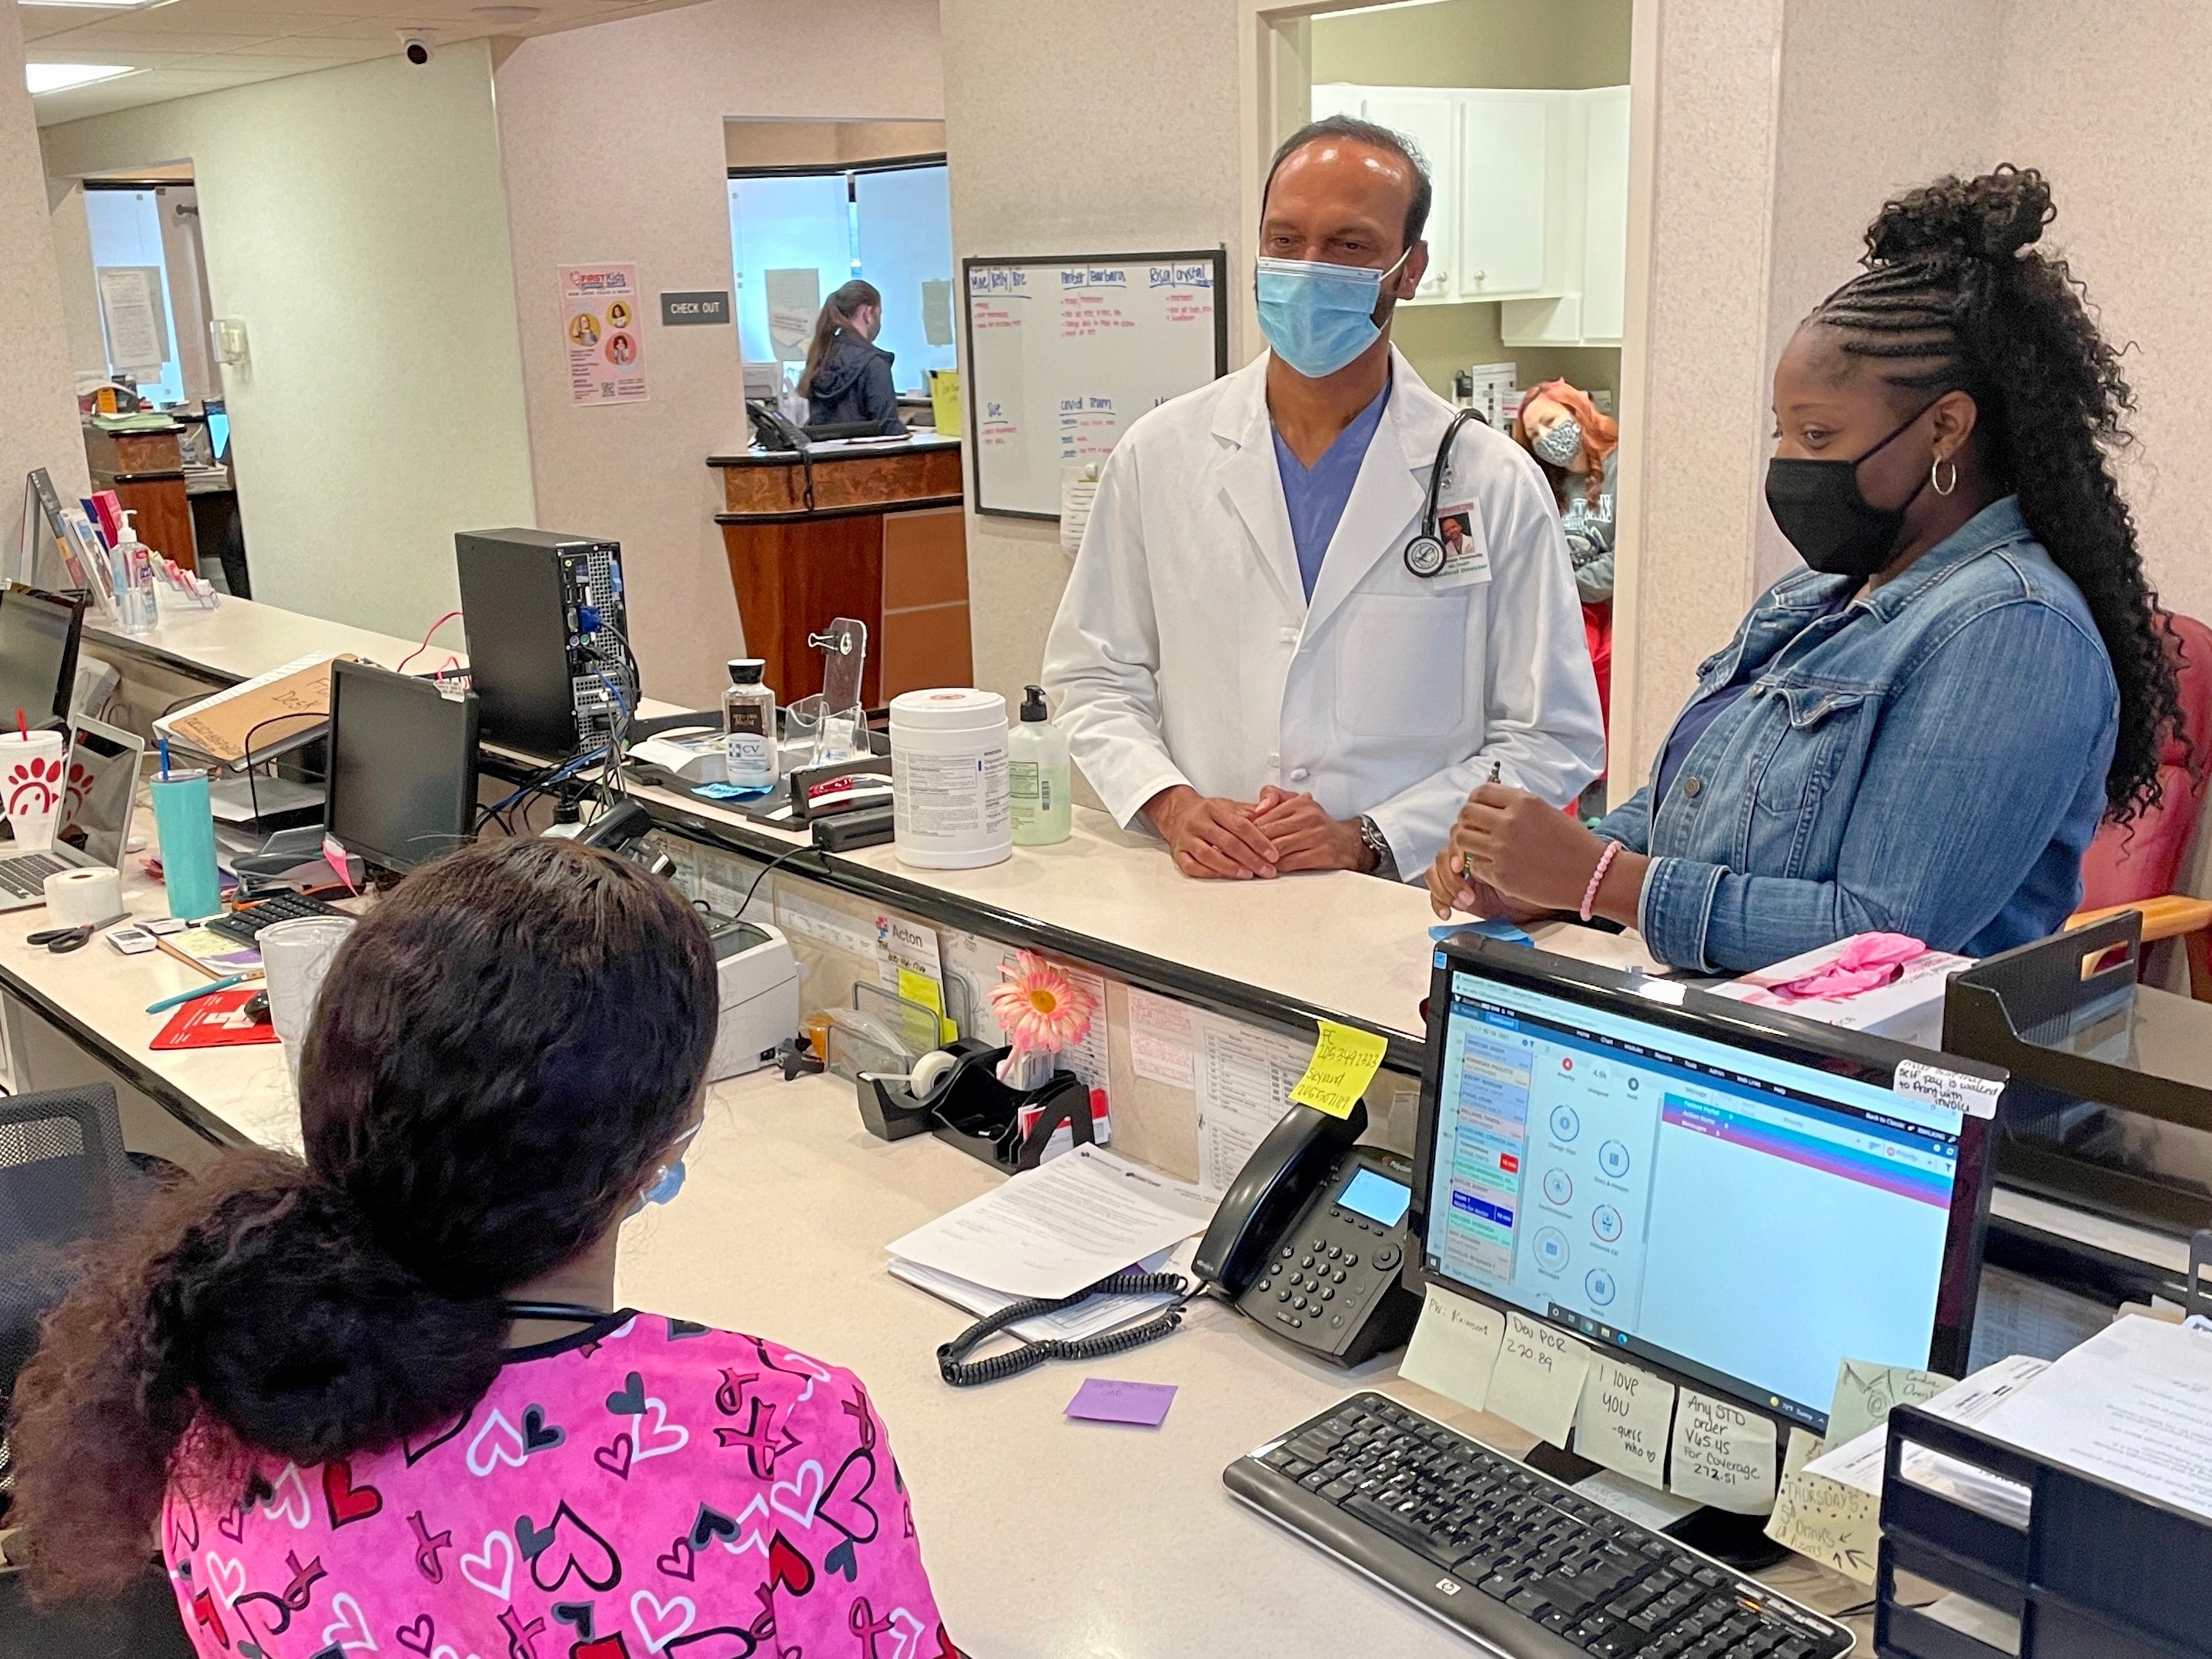 Dr. Ramesh Peramsetty, center, speaks with medical assistants Crystal Cain, standing, and Breanna Wilkins between patients at his Crimson Care clinic on Veterans Memorial Parkway in Tuscaloosa.